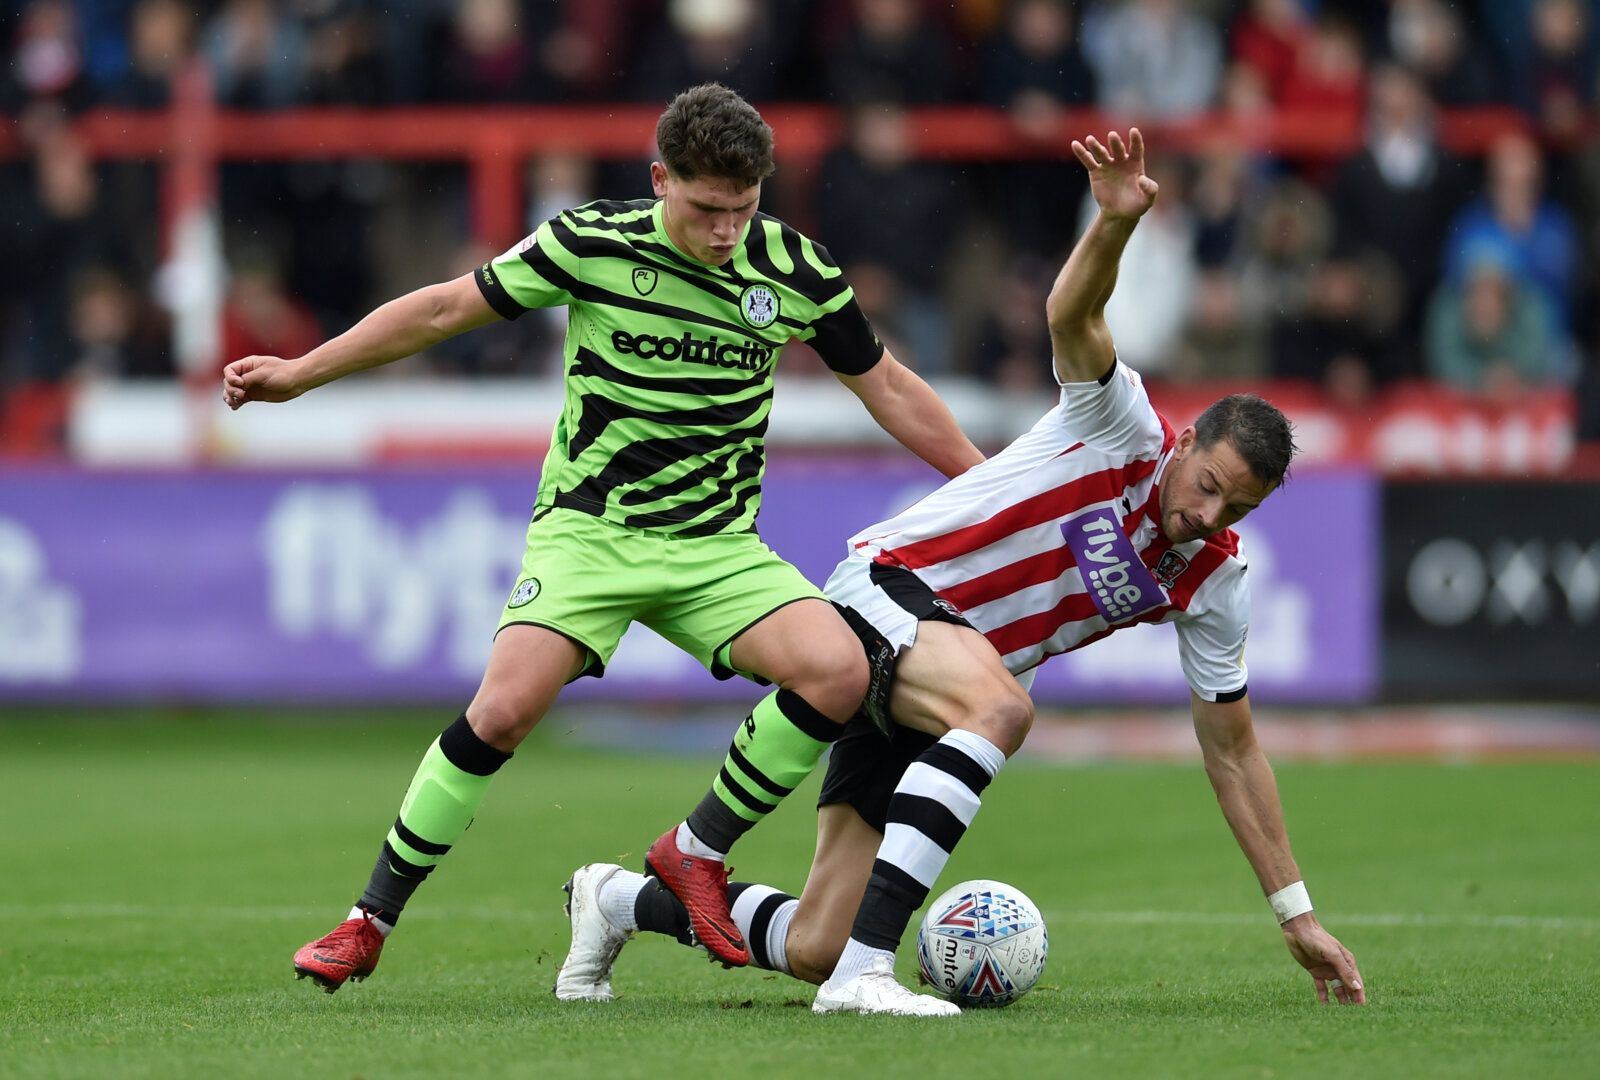 Soccer Football - League Two - Exeter City v Forest Green Rovers - St James Park, Exeter, Britain - October 12, 2019  Exeter City's Aaron Martin in action with Forest Green Rovers' Matty Stevens  Action Images/Adam Holt  EDITORIAL USE ONLY. No use with unauthorized audio, video, data, fixture lists, club/league logos or 